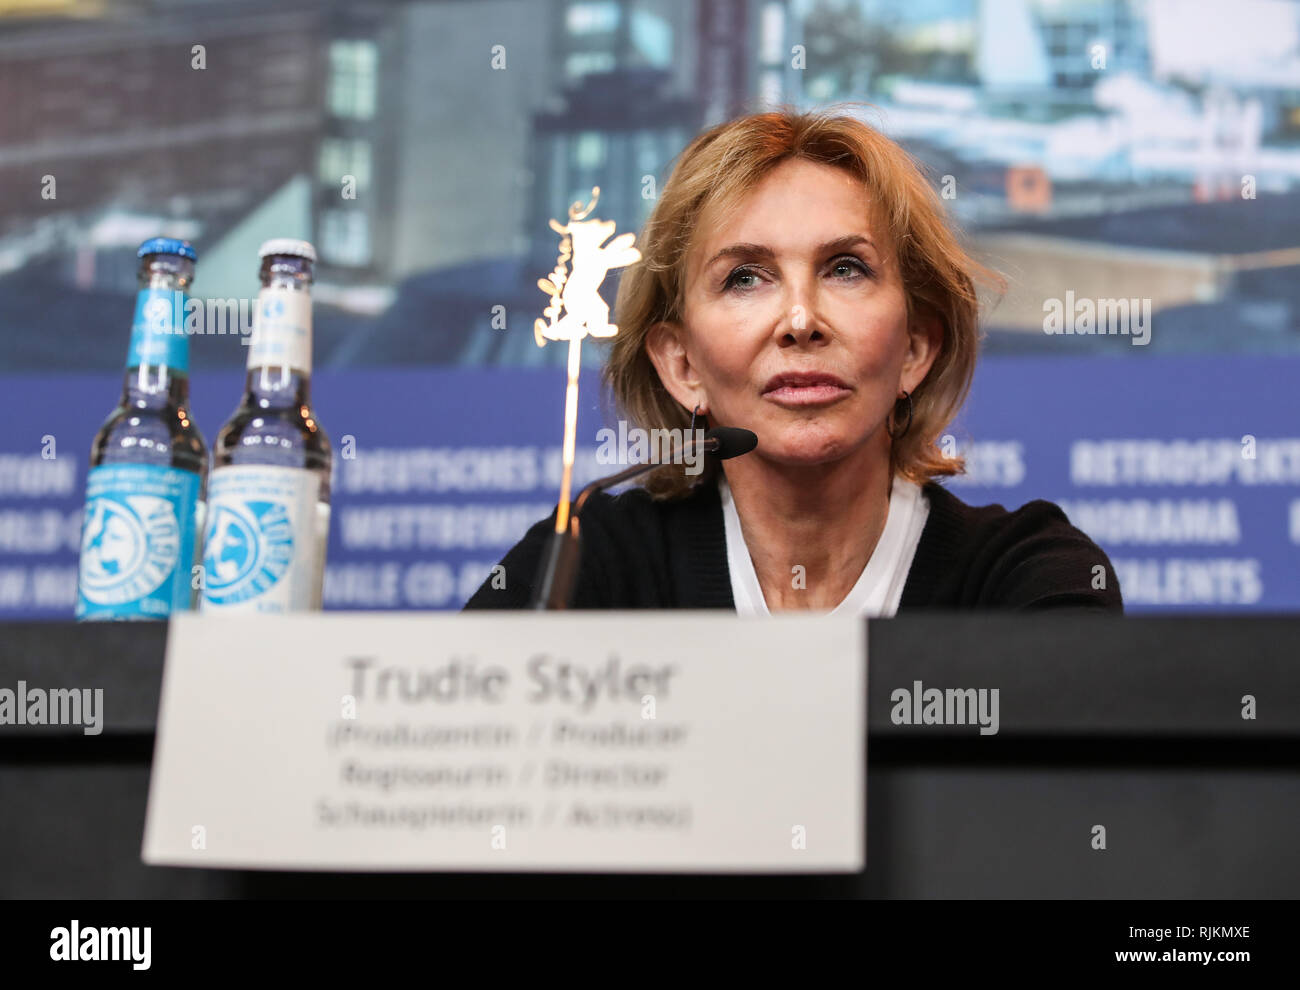 (190207) -- BERLIN, Feb. 7, 2019 (Xinhua) -- Member of the Berlinale 2019 jury Trudie Styler attends a press conference during the 69th Berlin International Film Festival in Berlin, capital of Germany, Feb. 7, 2019. The 69th Berlin International Film Festival kicked off here on Thursday and is scheduled to last until Feb. 17. (Xinhua/Shan Yuqi) Stock Photo